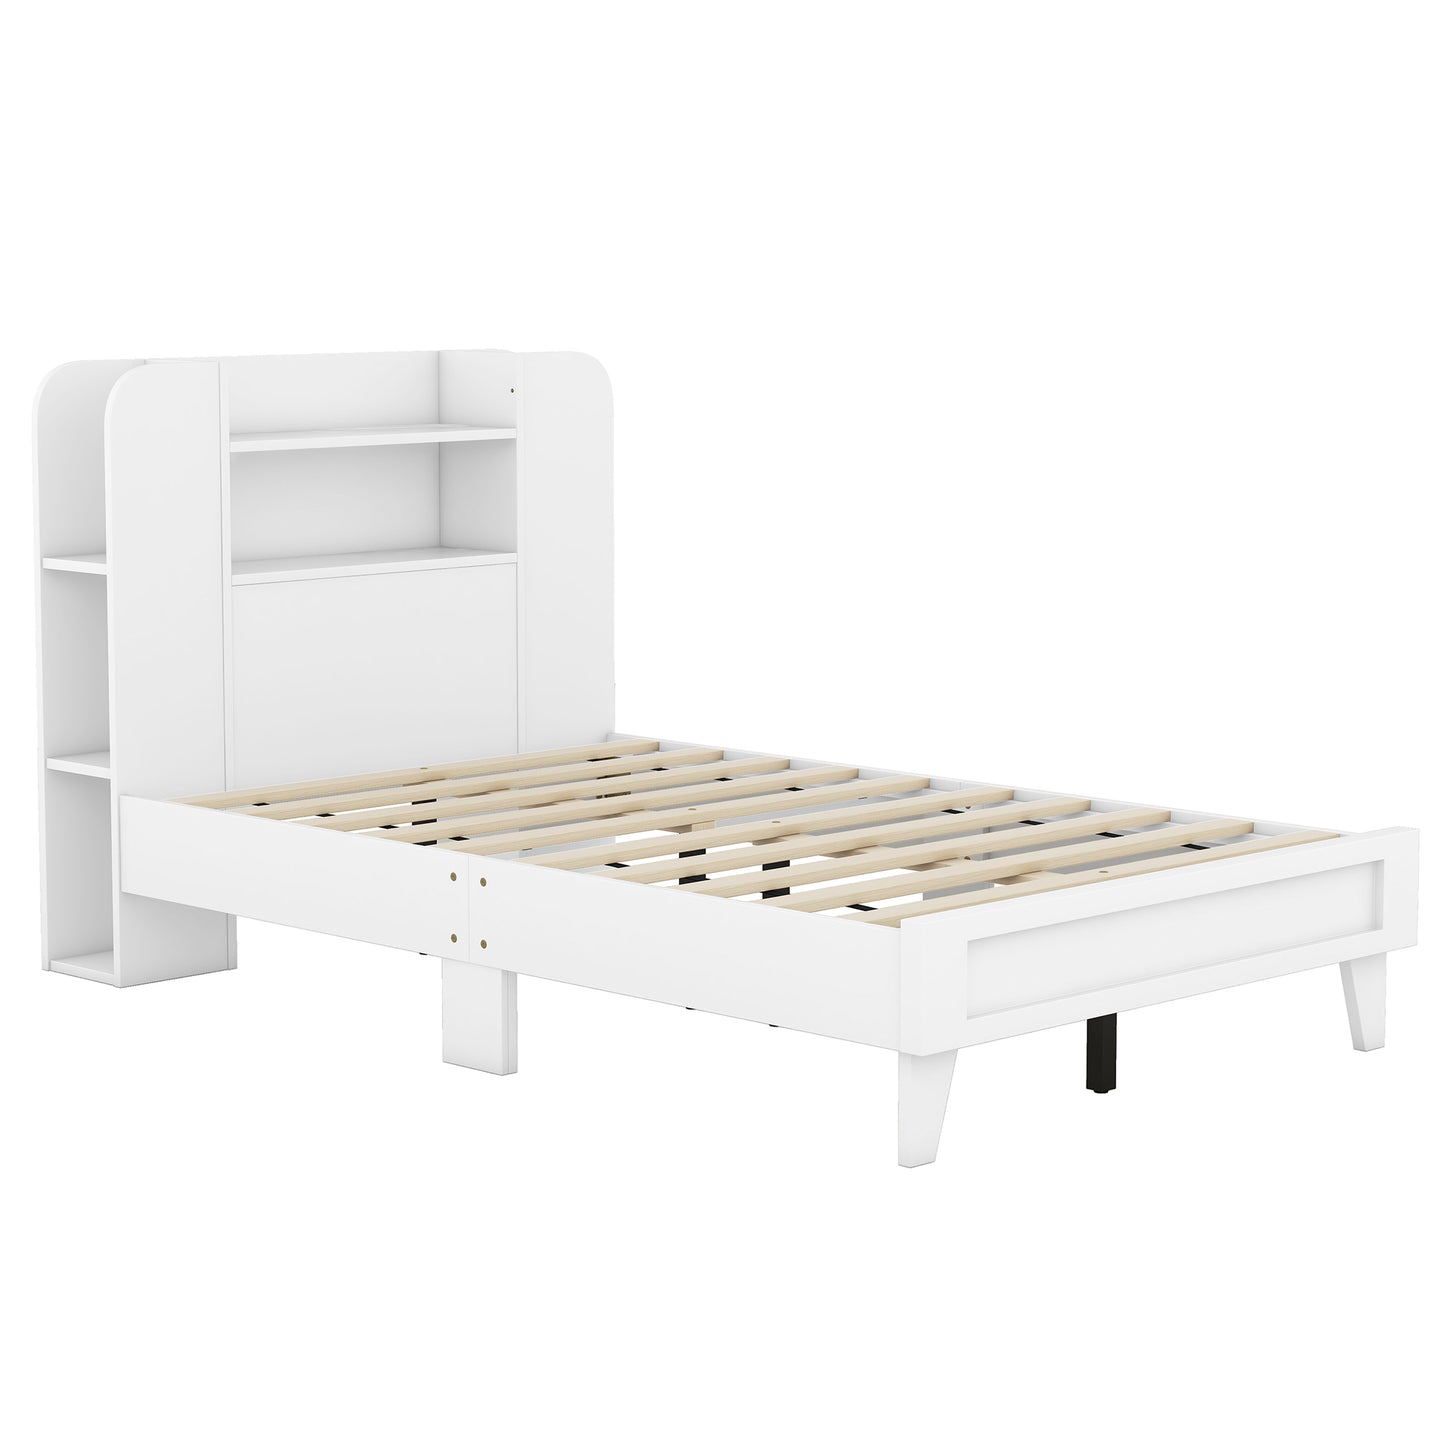 Twin Size Platform Bed with Storage Headboard,Multiple Storage Shelves on Both Sides,White